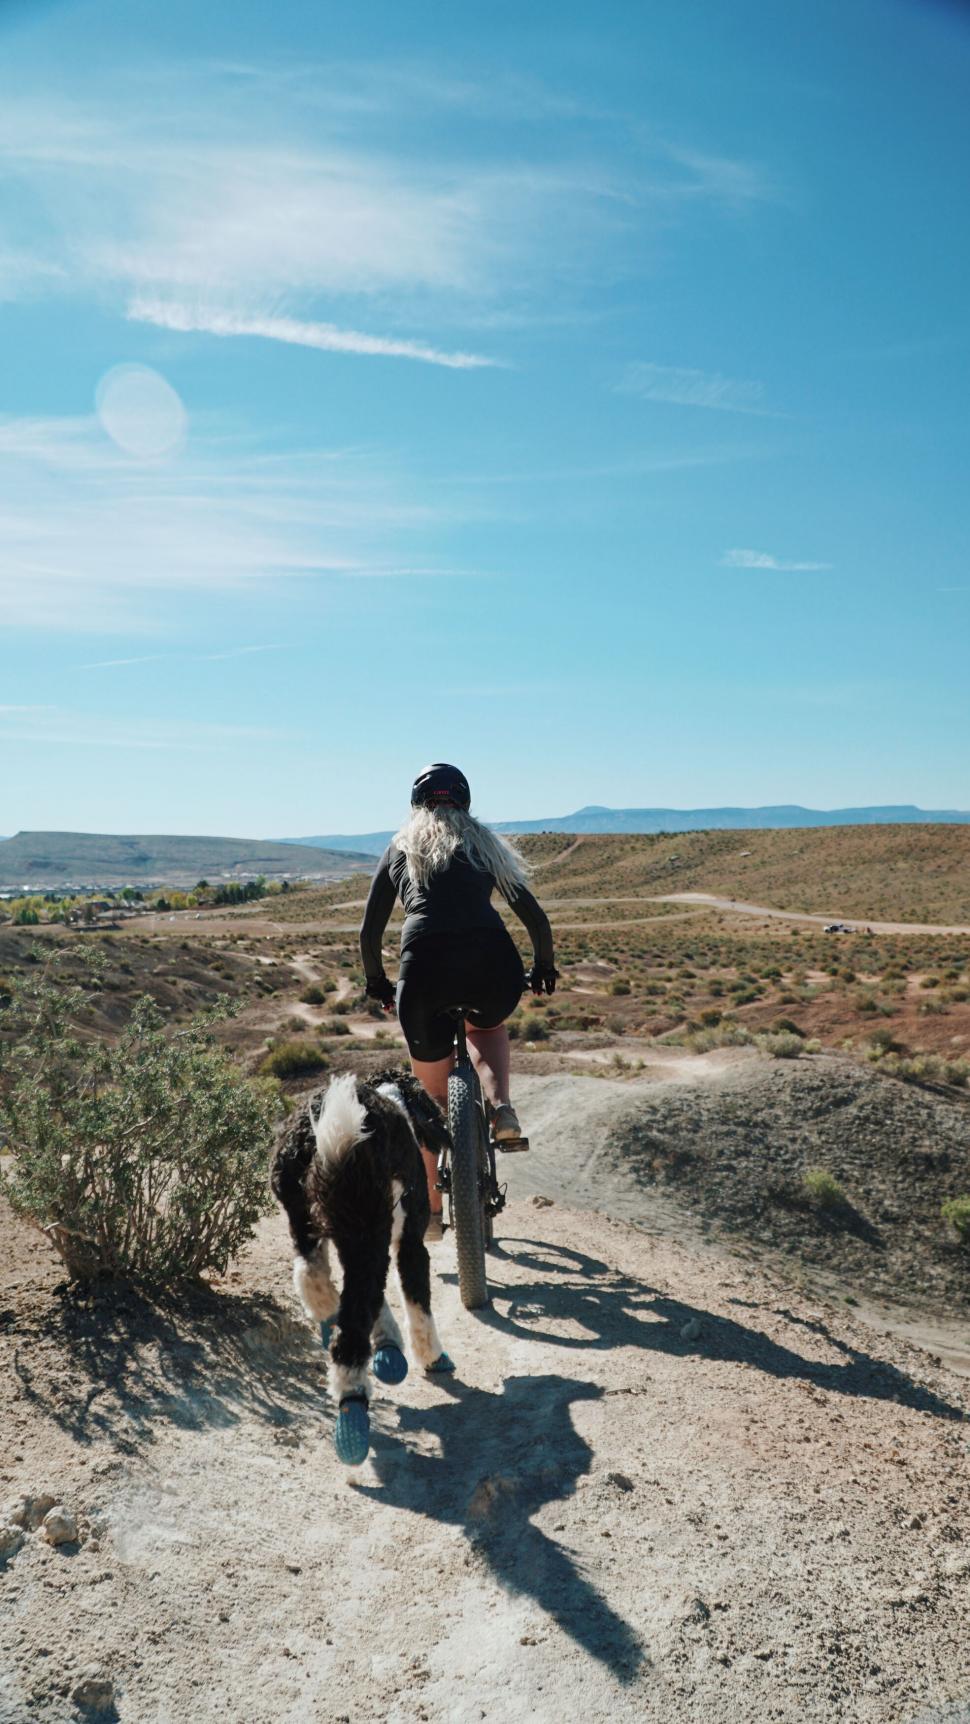 Free Image of Cyclist and dog on a desert trail 